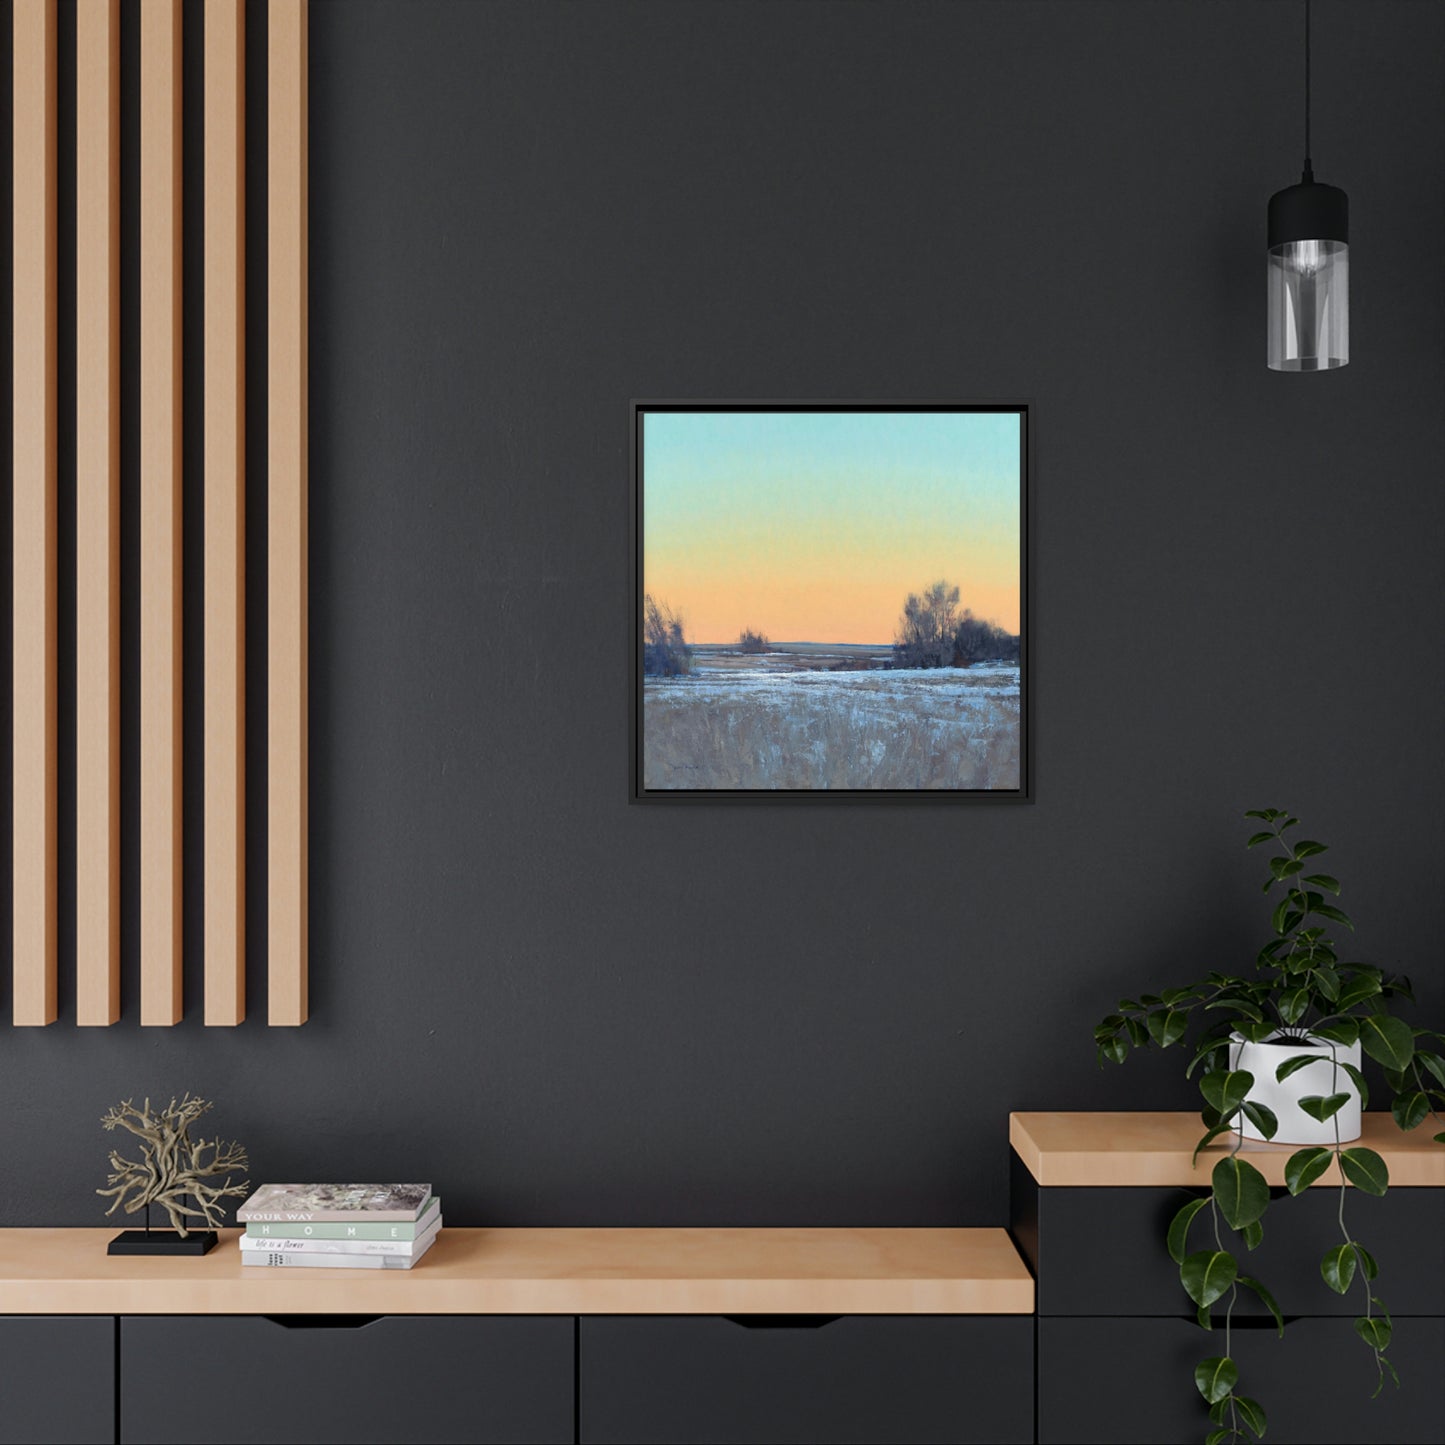 Ben Bauer: "Late Afternoon in March, Lowry, MN" - Square Framed Canvas Reproduction